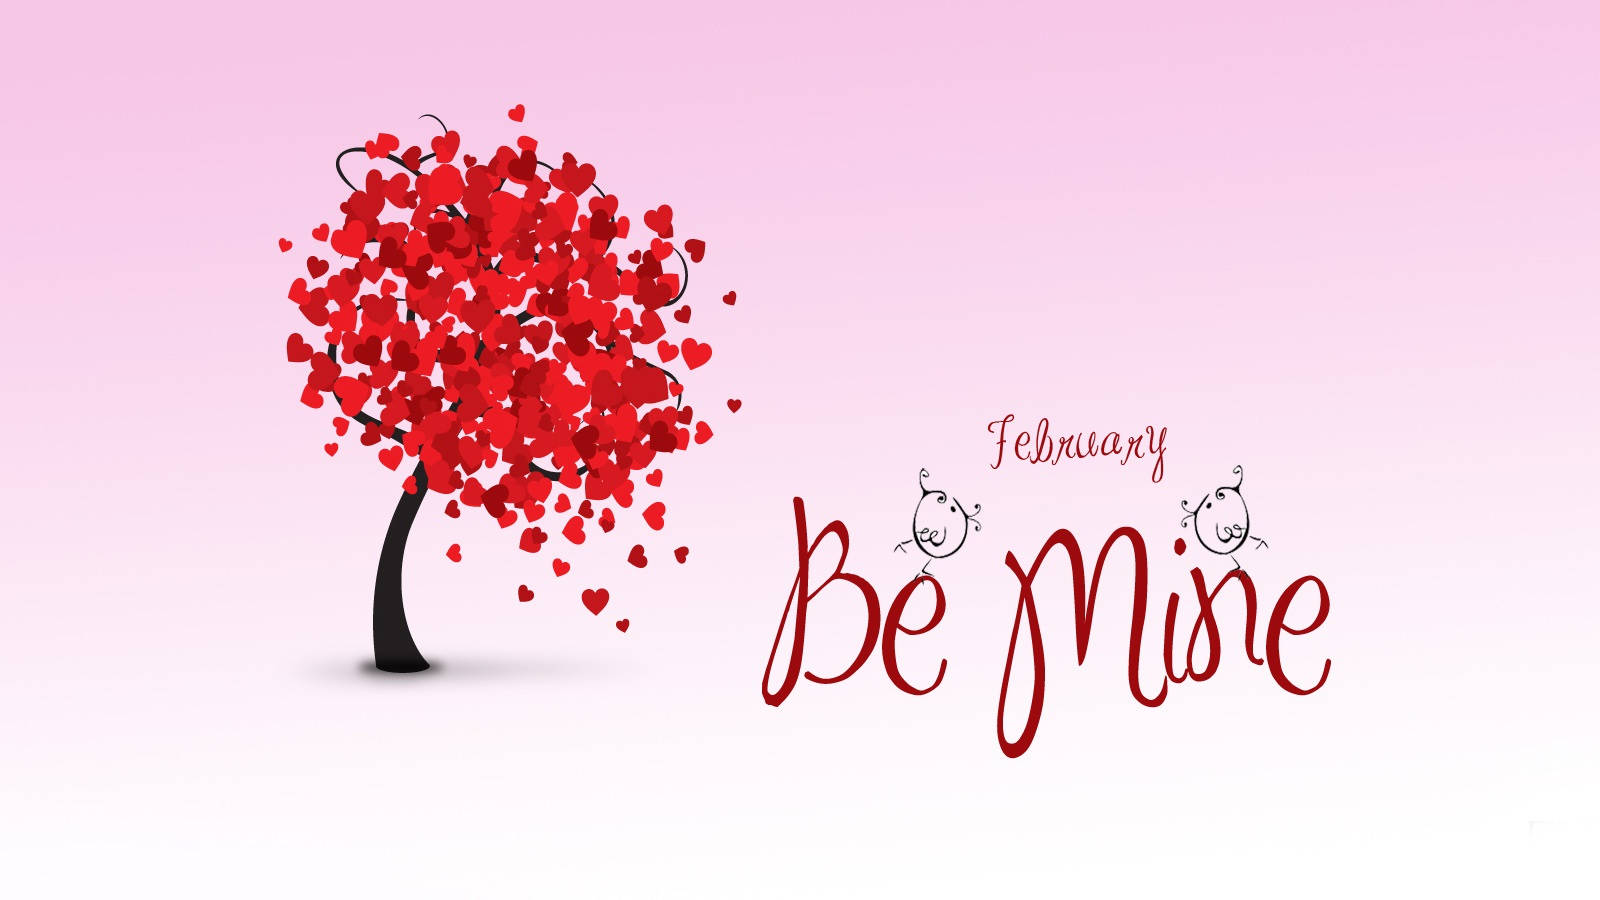 Free February Wallpaper Downloads, [100+] February Wallpapers for FREE |  